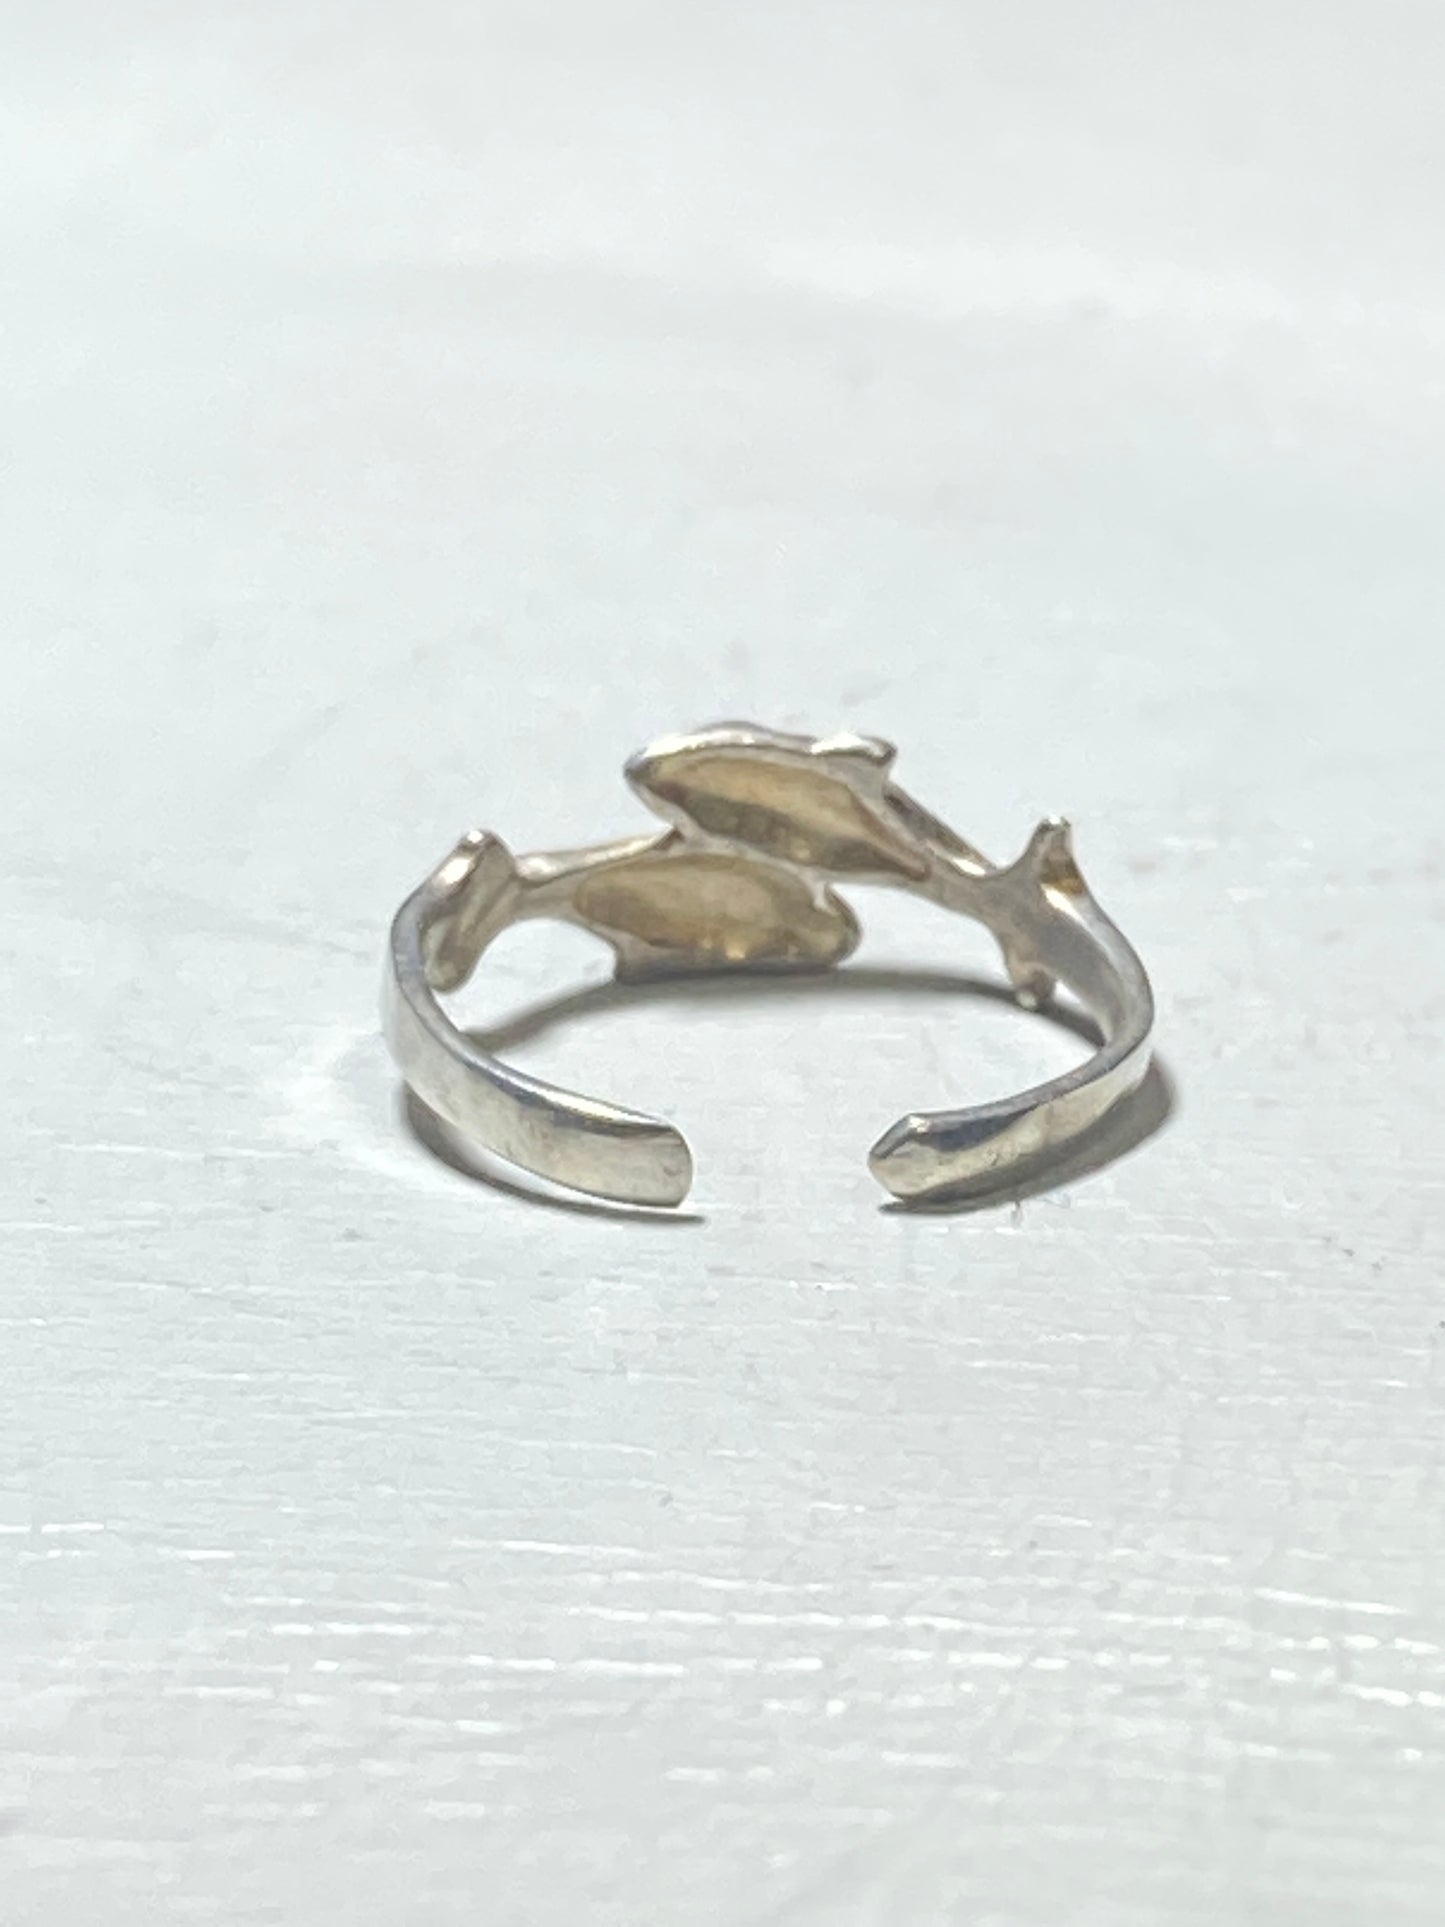 Toe ring dolphin band sterling silver women girls